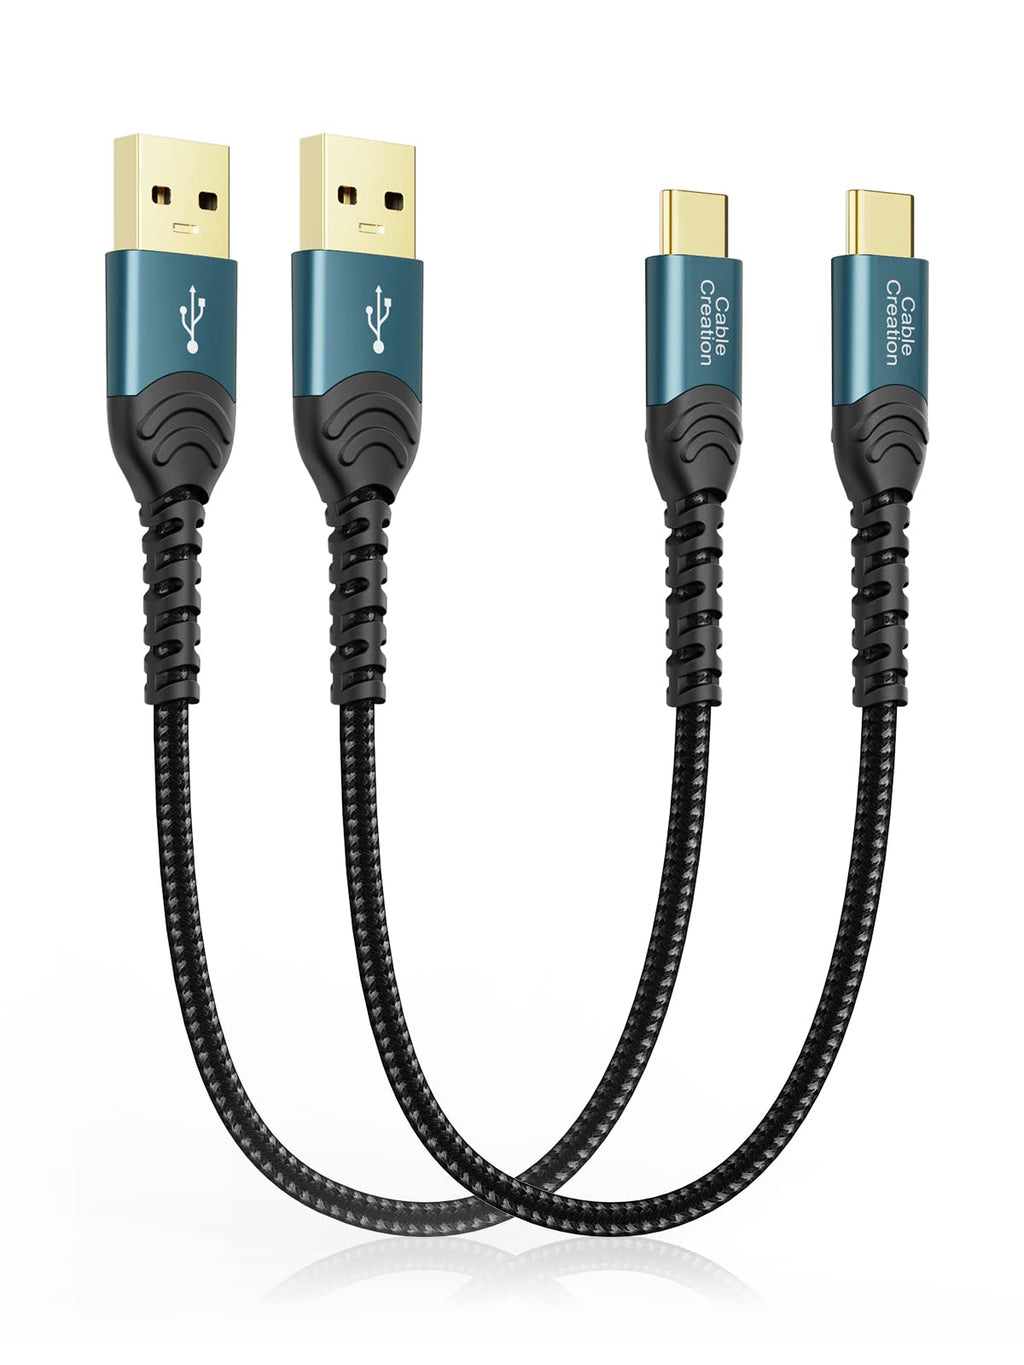  [AUSTRALIA] - USB Type C Cable 3A Fast Charging 2 Pack 1FT, CableCreation USB-A 2.0 to USB-C Charge Double-Braided Exterior Compatible with iPad Mini Galaxy S21 S20 S10 S9 Note 10 9 PS5 Controller, USB C Cord Blue